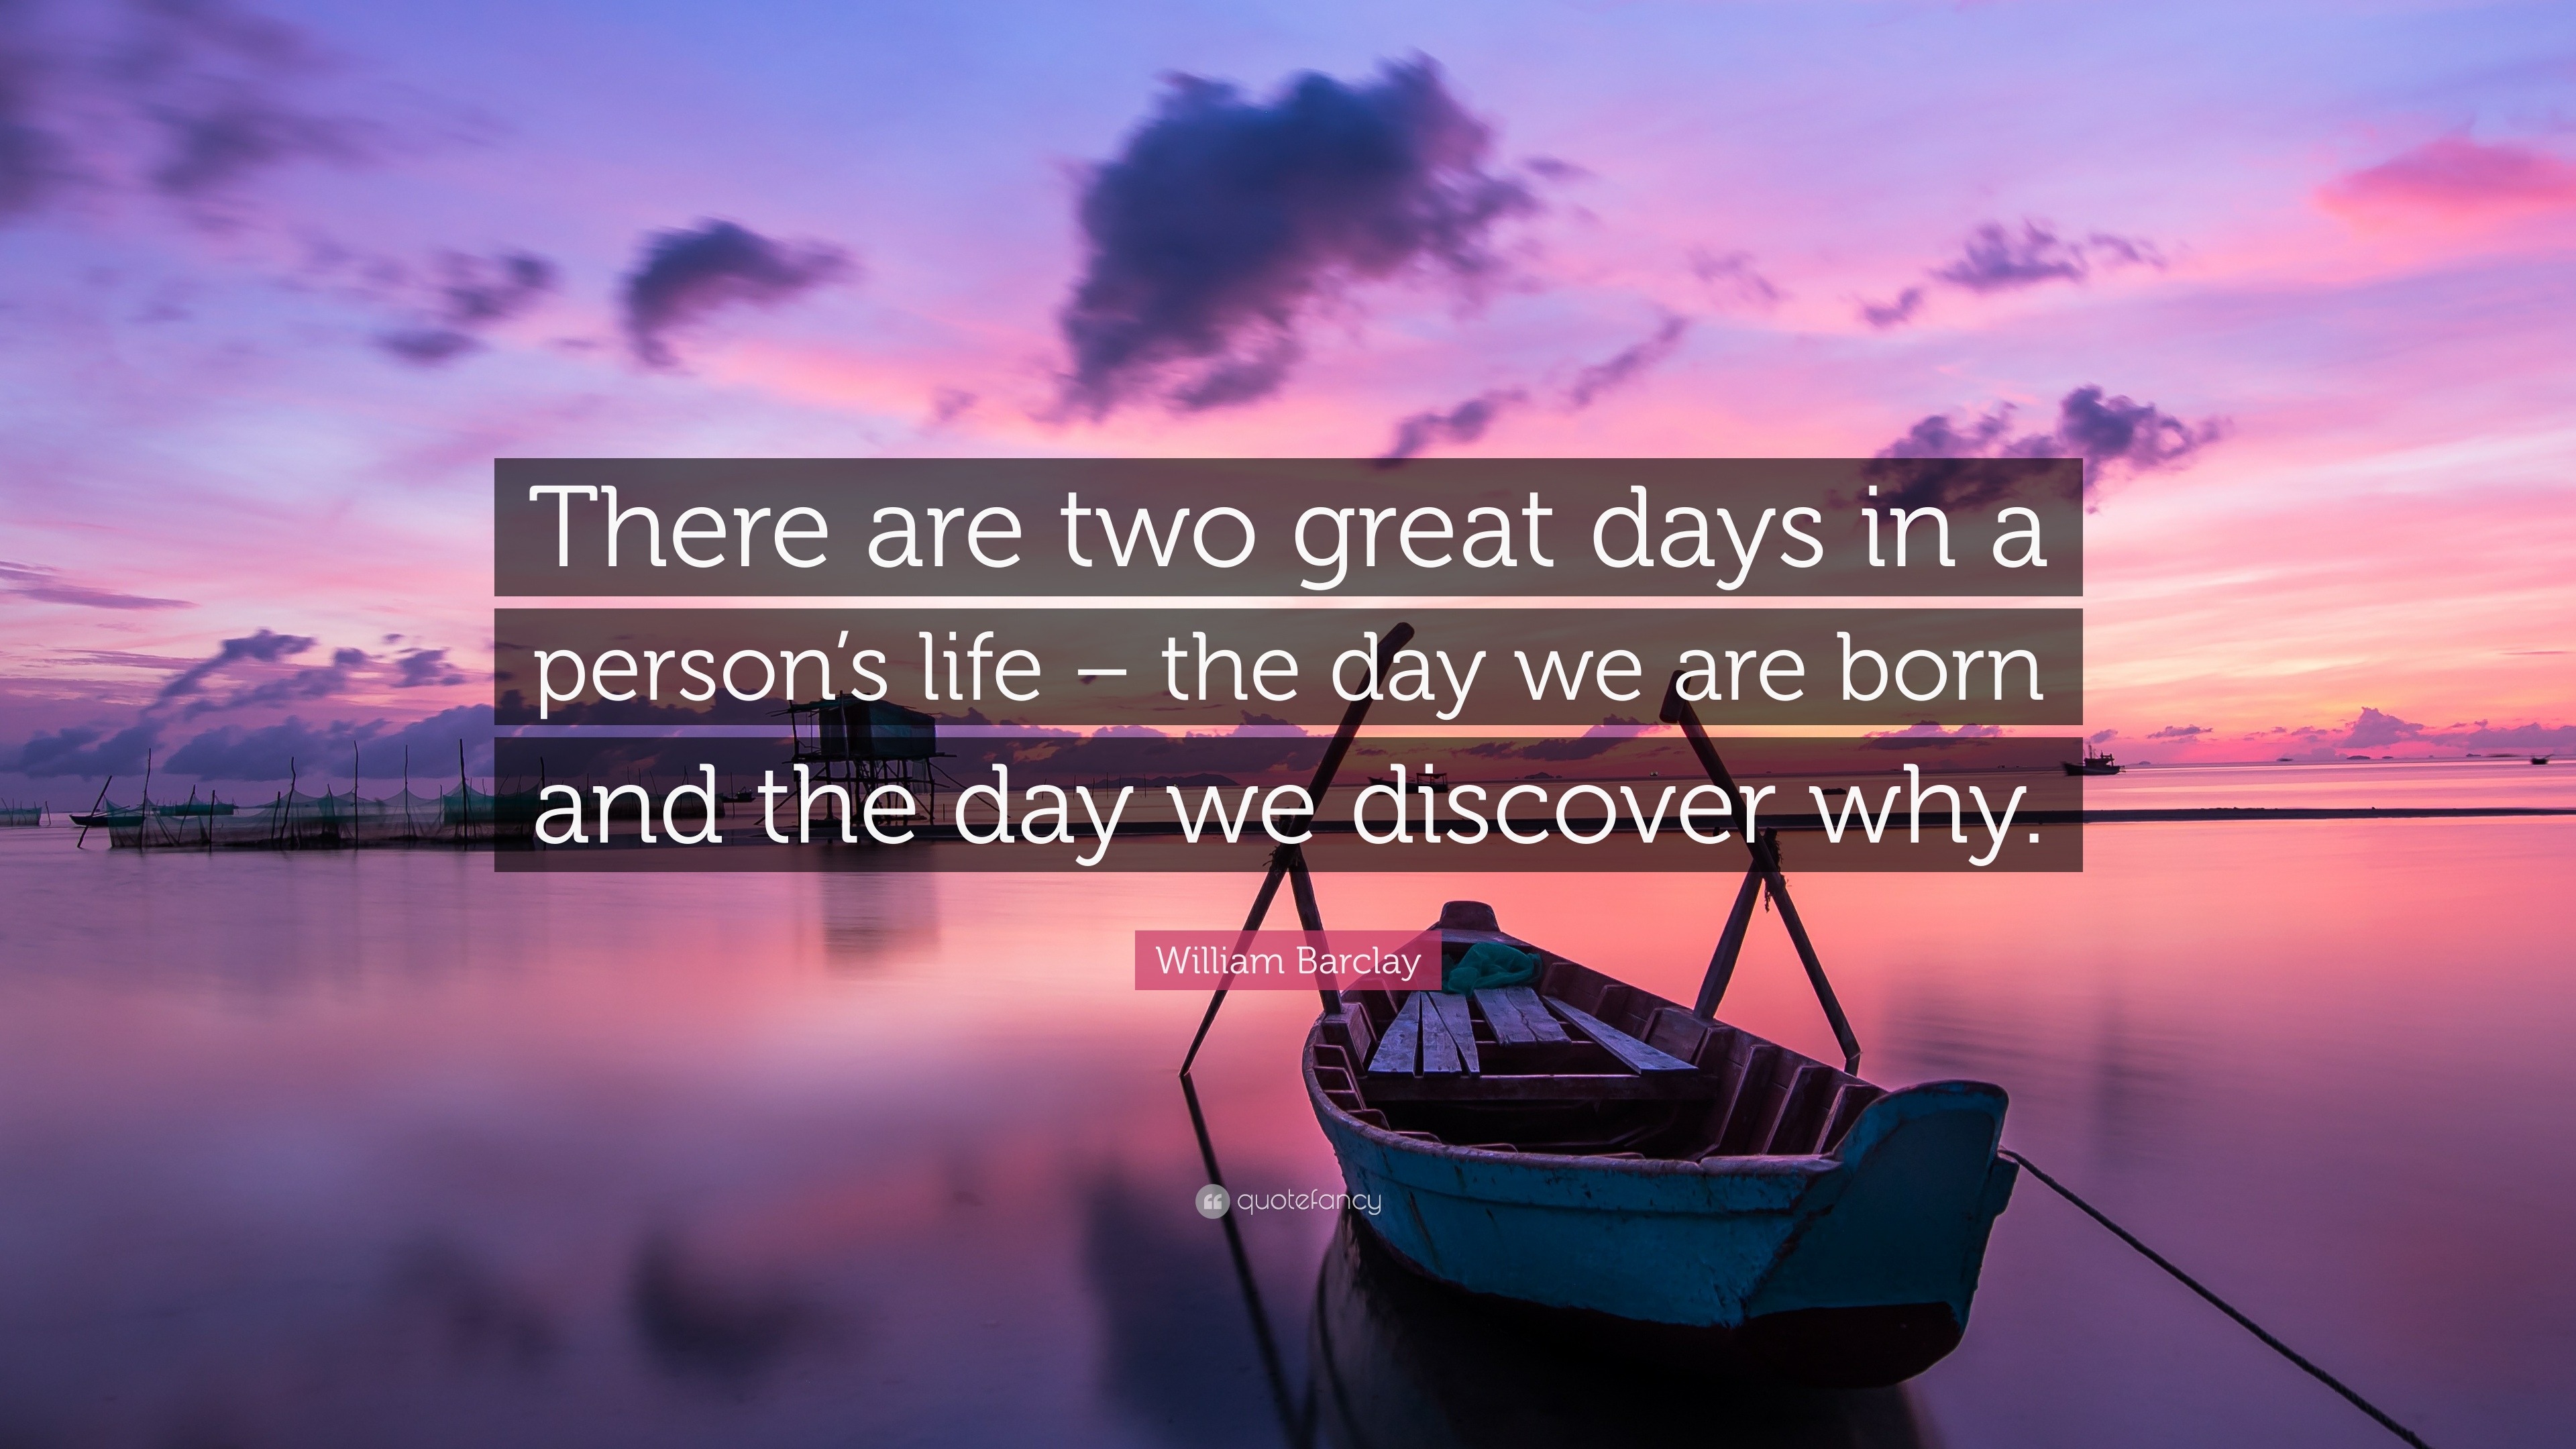 William Barclay Quote: “There are two great days in a person’s life